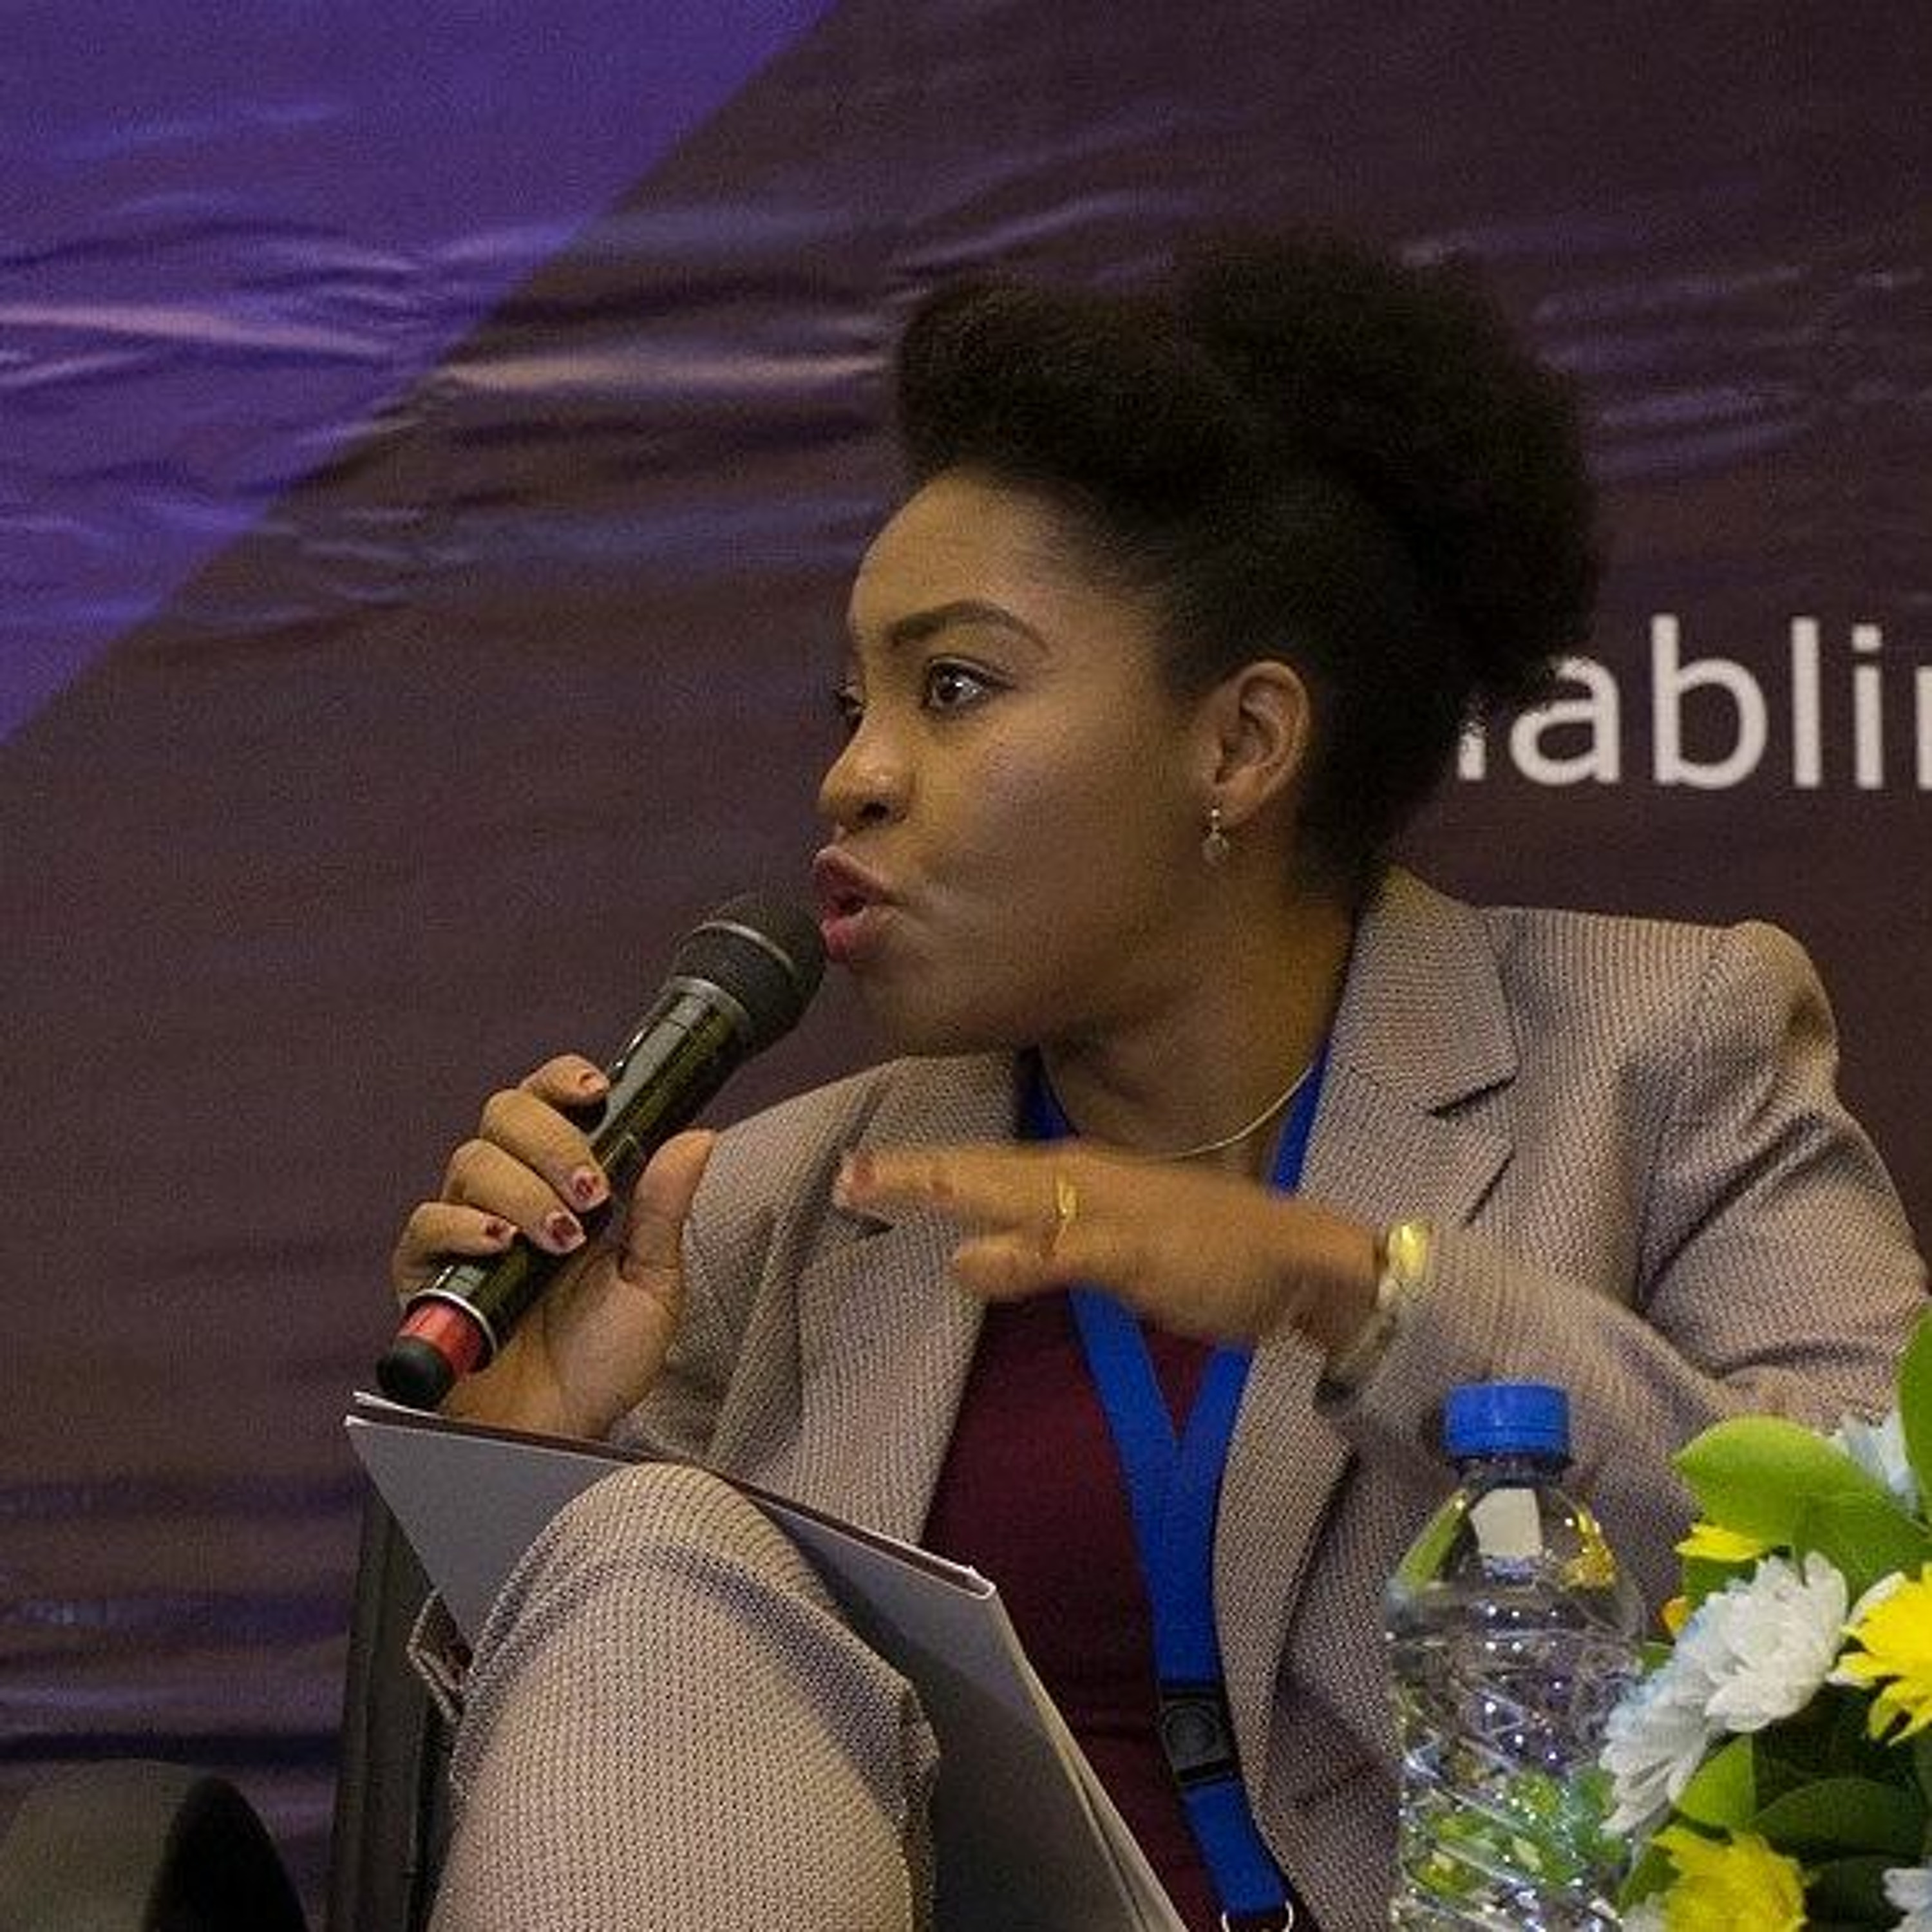 Helen Anatogu of Nigeria's iDEA incubator on how African founders should position to land funding